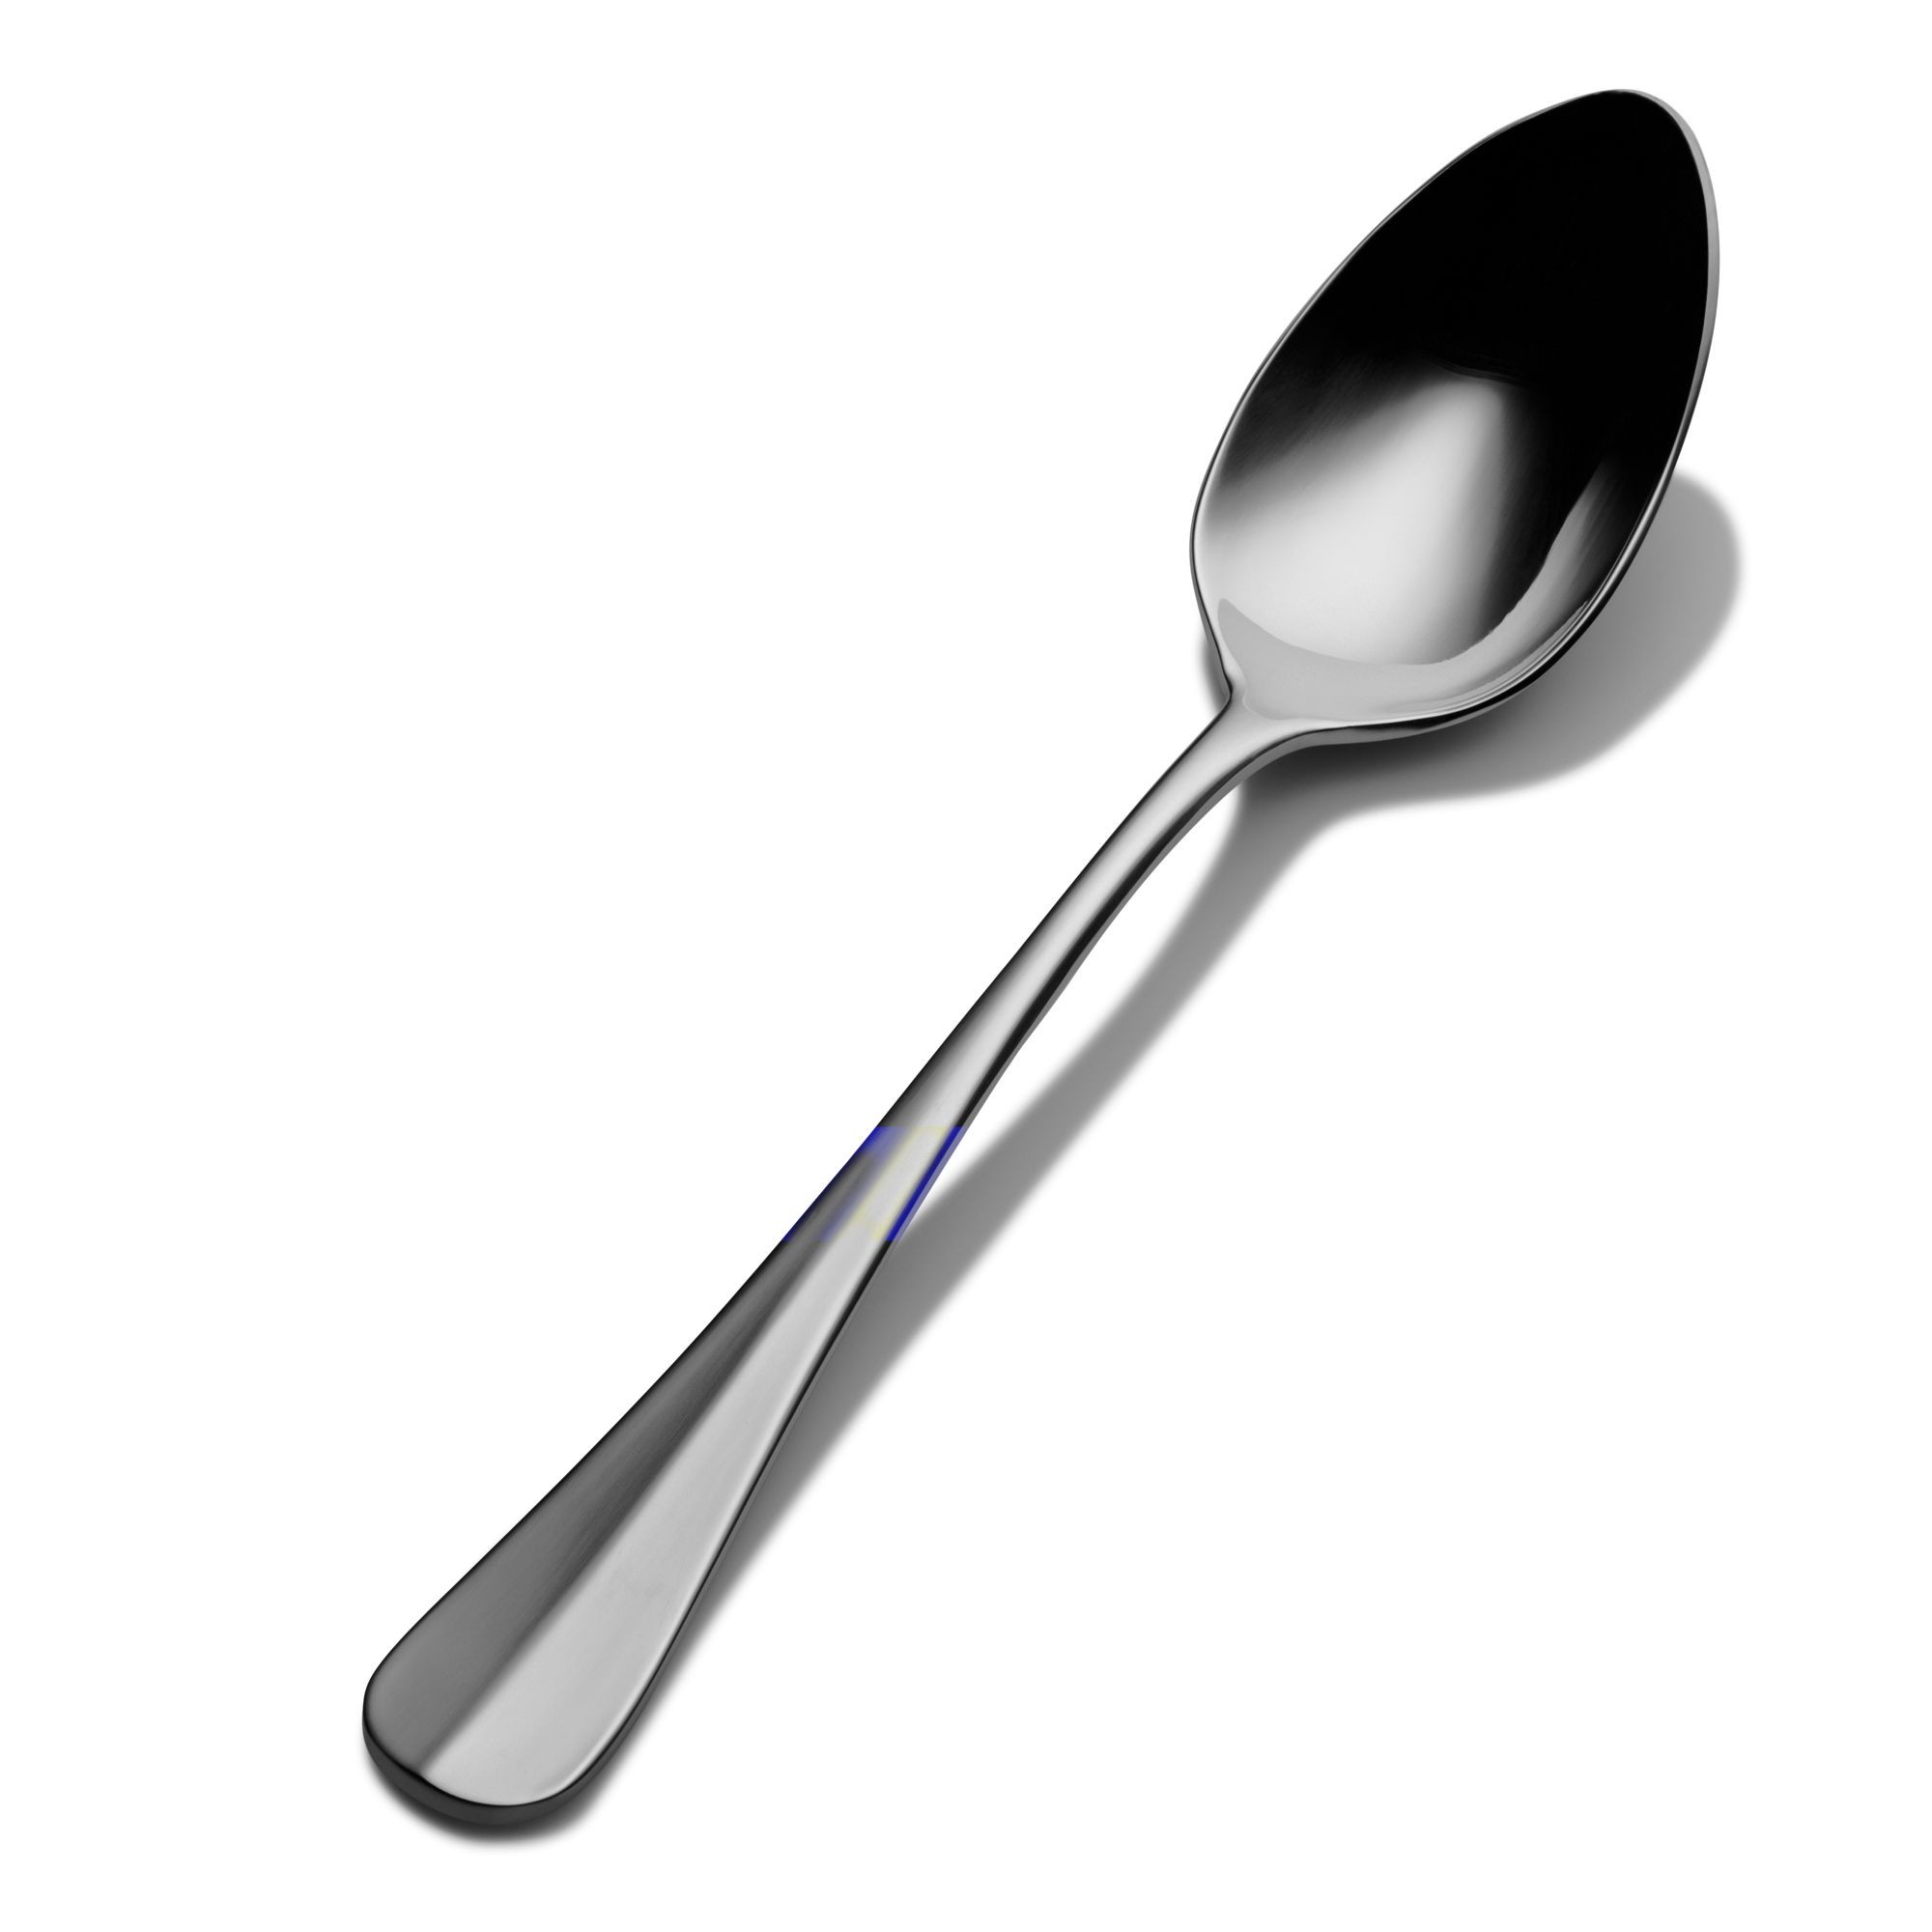 Bon Chef S1104 Chambers 18/8 Stainless Steel Serving Spoon